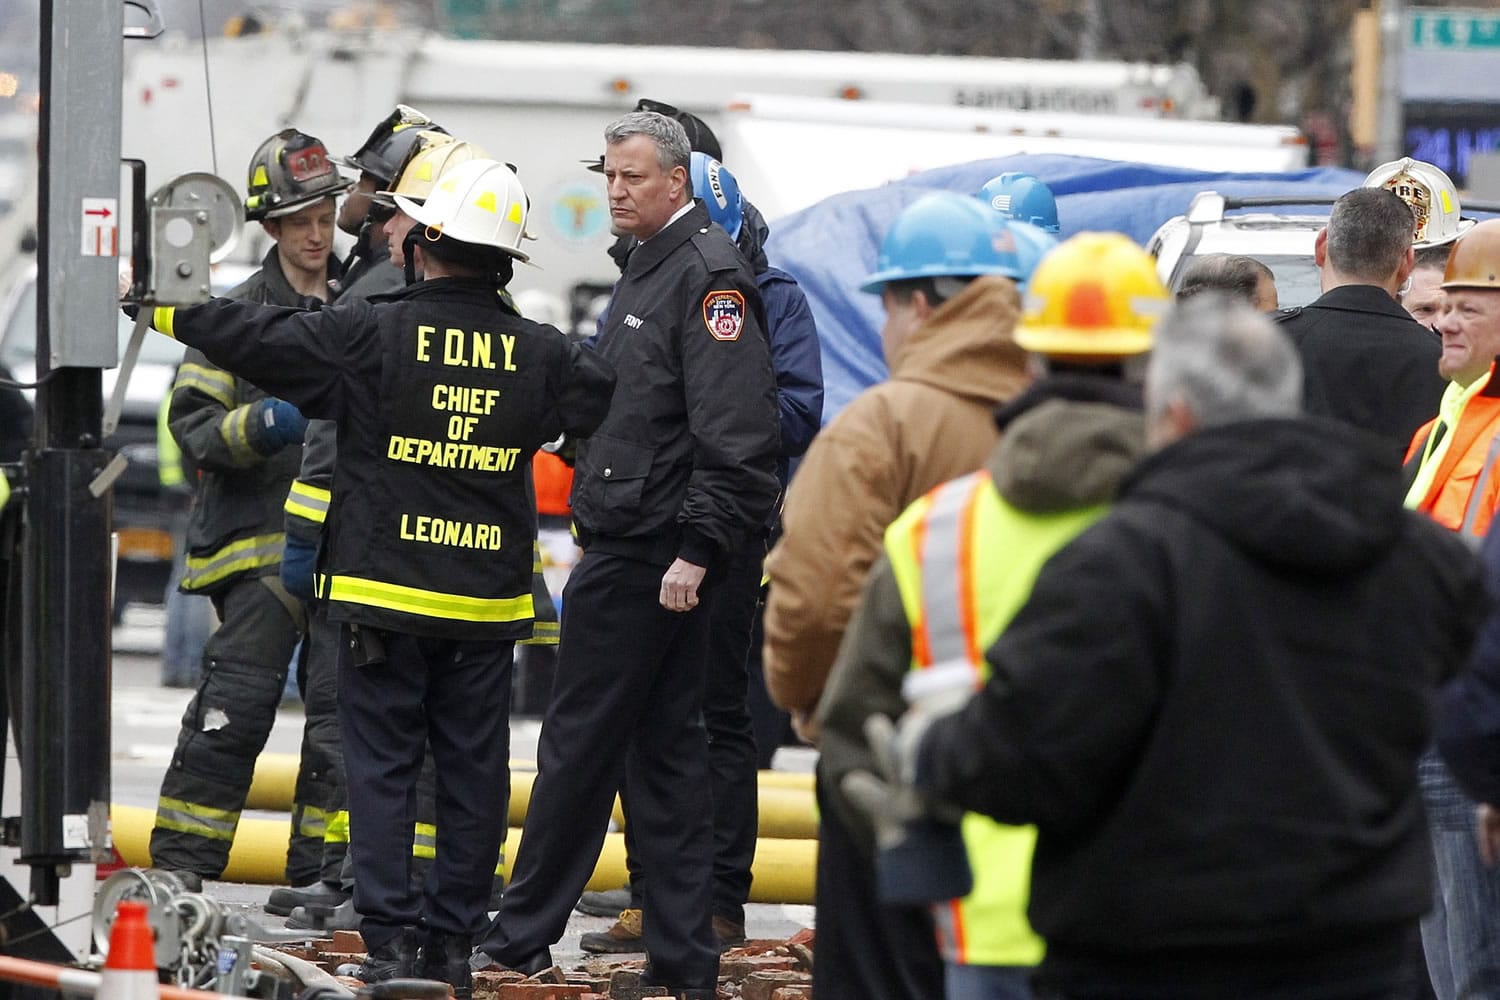 New York City Mayor Bill de Blasio, center, talks to FDNY Chief James Leonard, left, while visiting the site of a partial building collapse in the East Village neighborhood of New York on Friday.